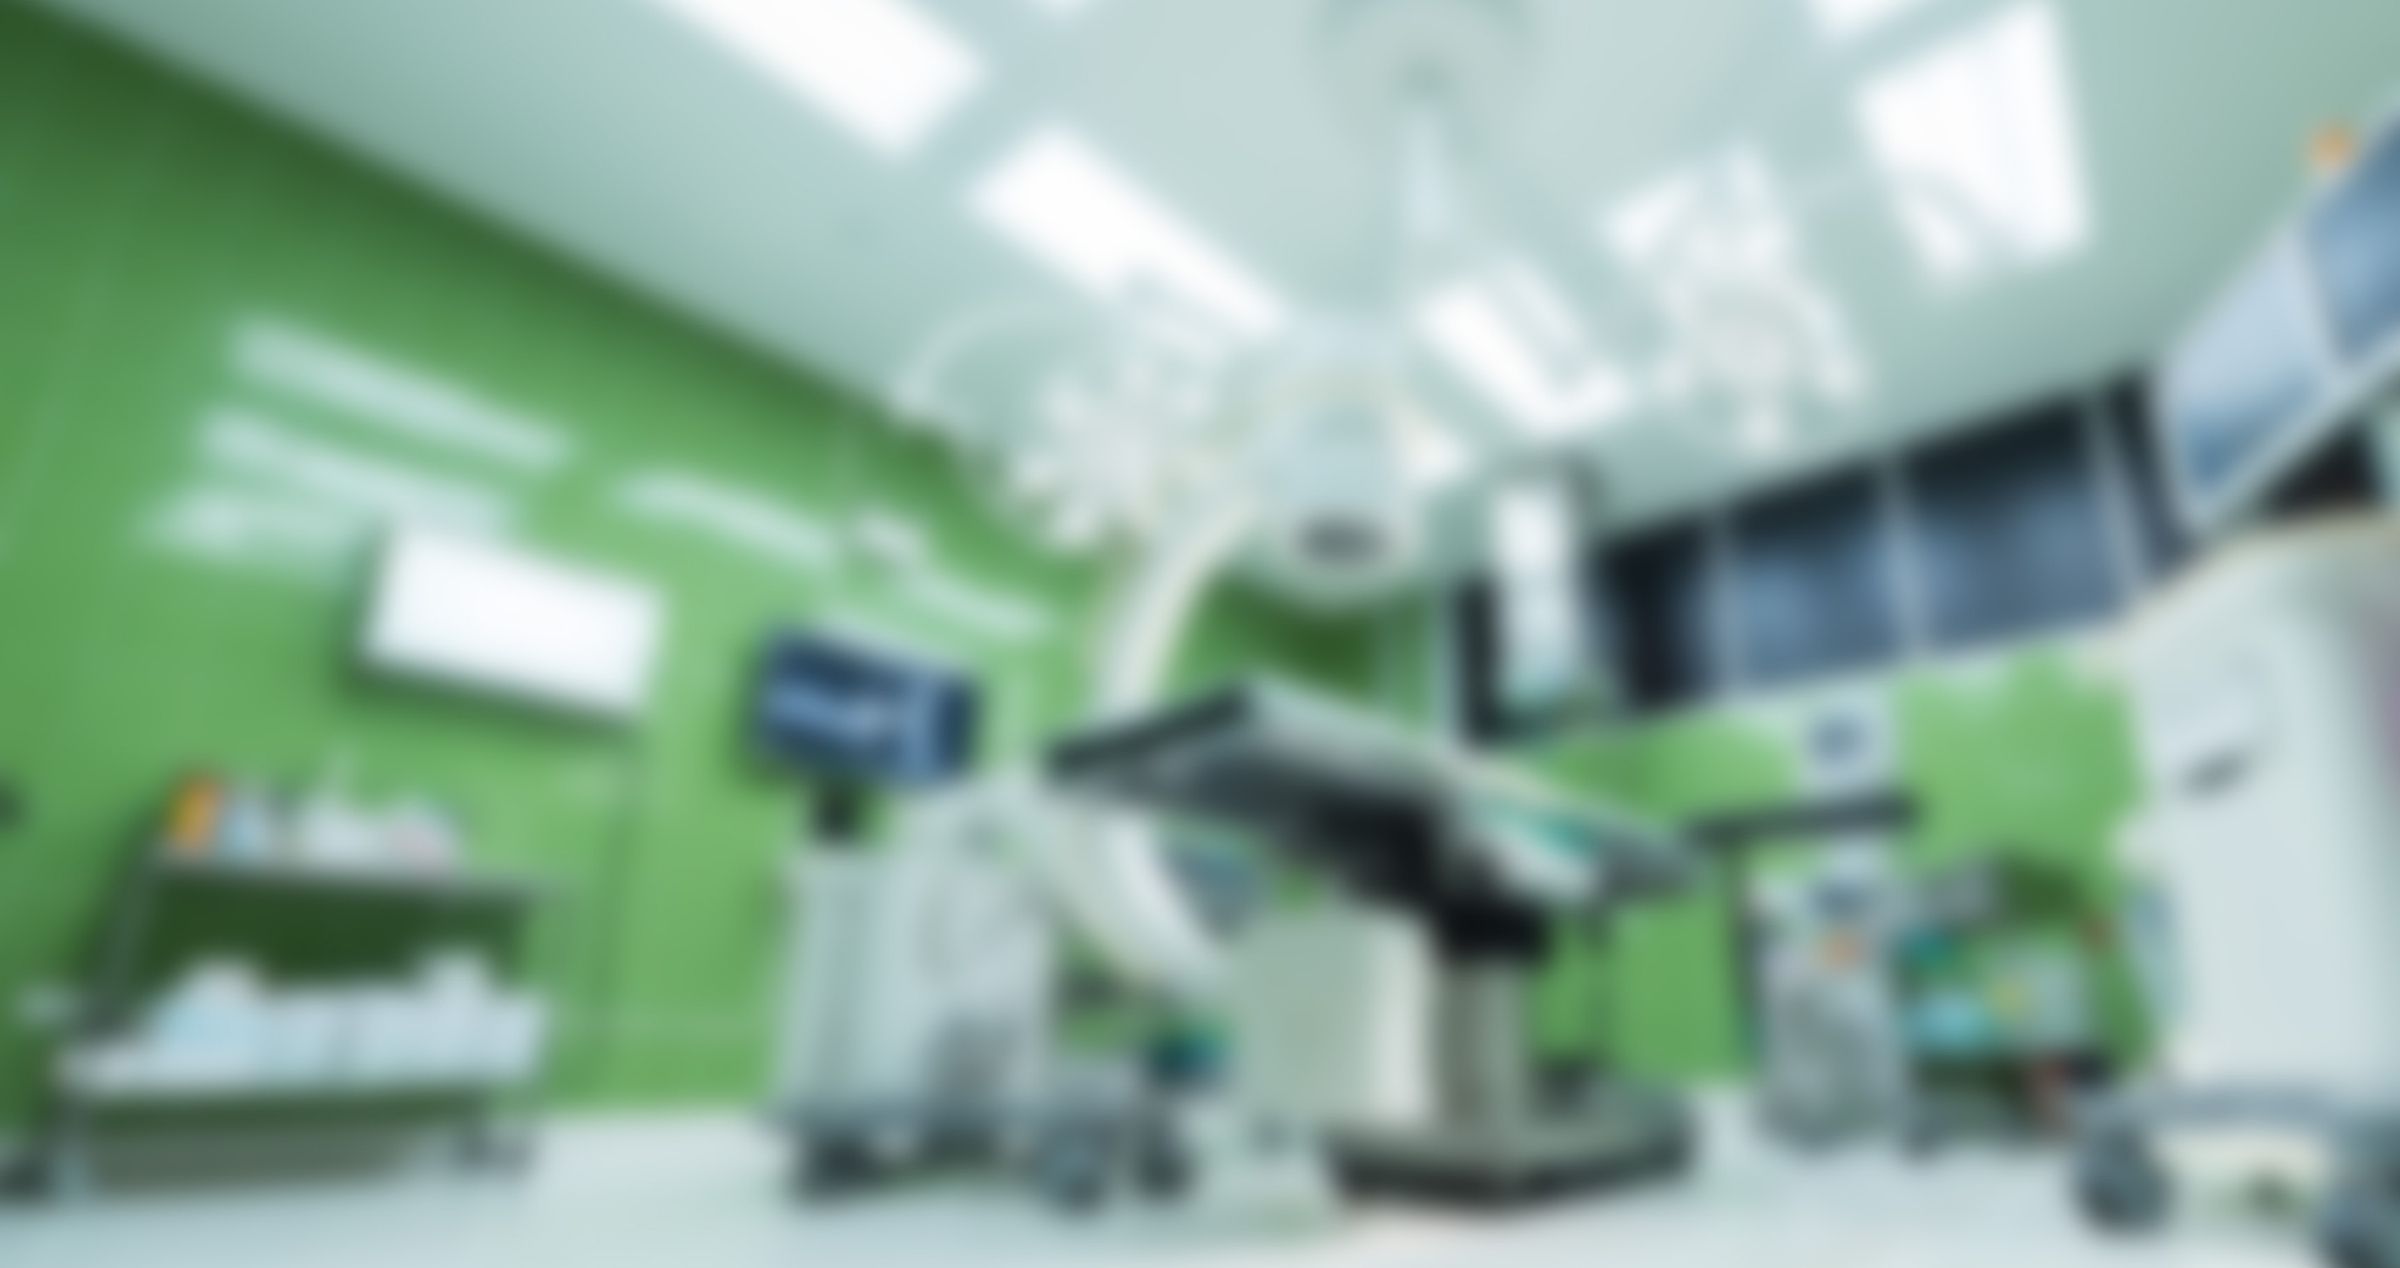 Blurred image of operating room